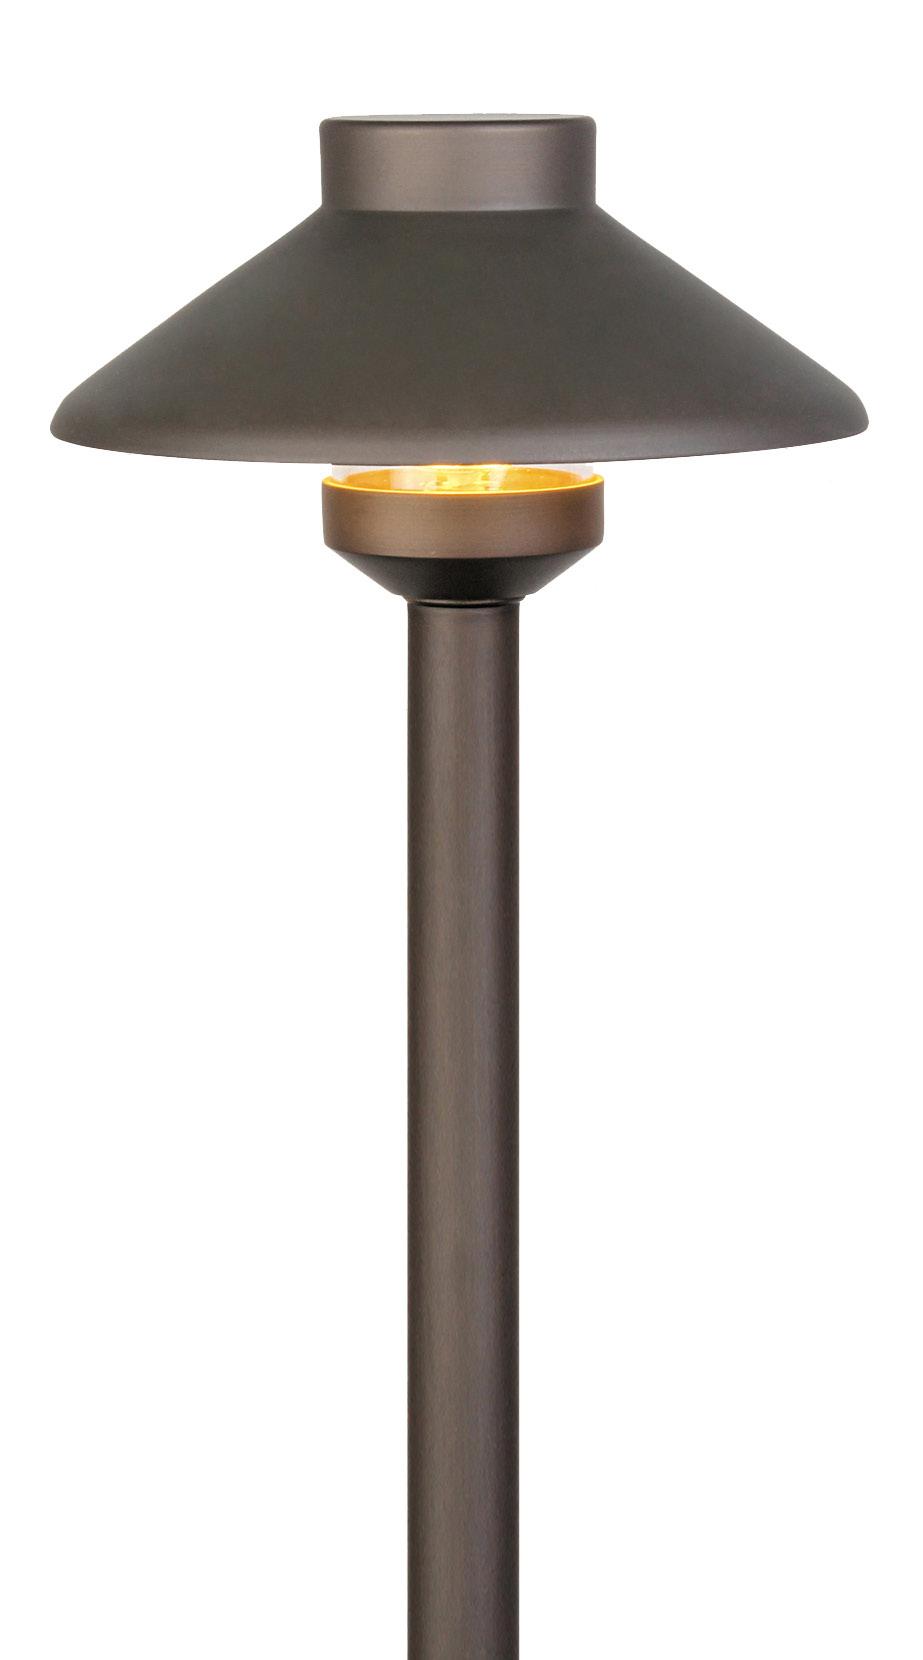 PATH LIGHTS TS-B301 Overall Height: 22-1/4 TS-B302 Overall Height: 23-1/4 TS-B304 Overall Height: 24 TS-B306 Overall Height: 21-1/4 Elegant & Stylish Path Lights ITEMS INCLUDED: Silicone Wire